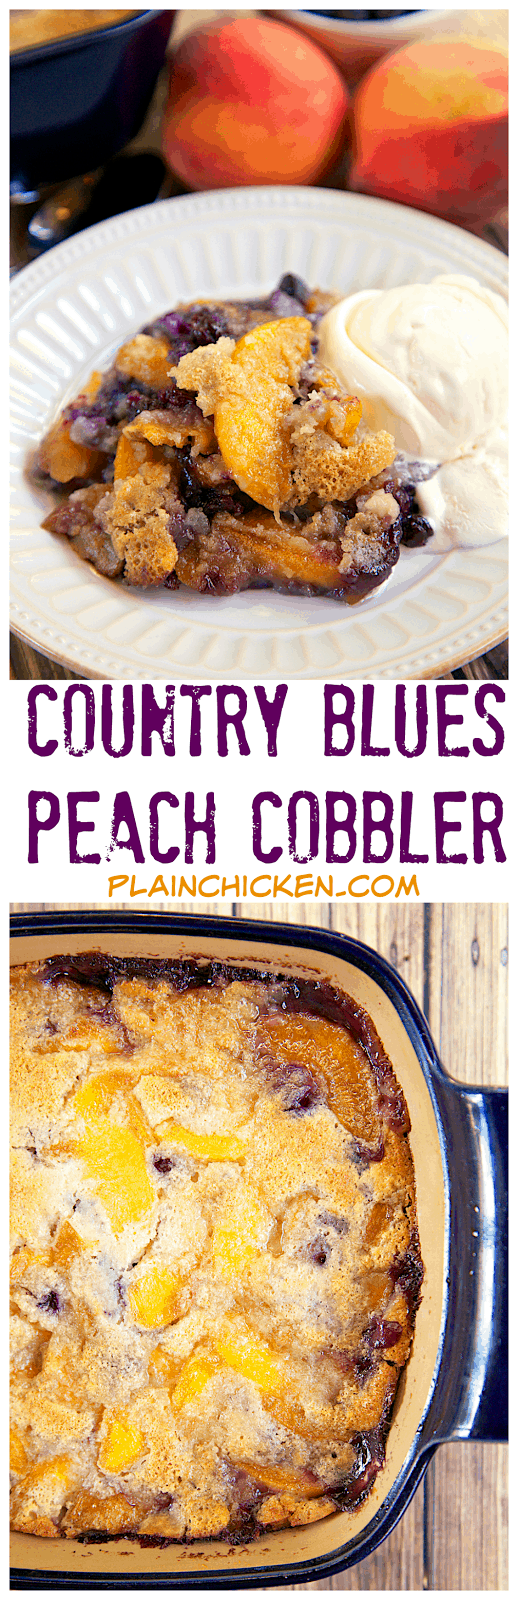 Country Blues Peach Cobbler - peaches, blueberries, butter, Martha White Blueberry Muffin mix - super quick and easy dessert - can use fresh or frozen peaches and blueberries. Serve with ice cream for a delicious dessert!